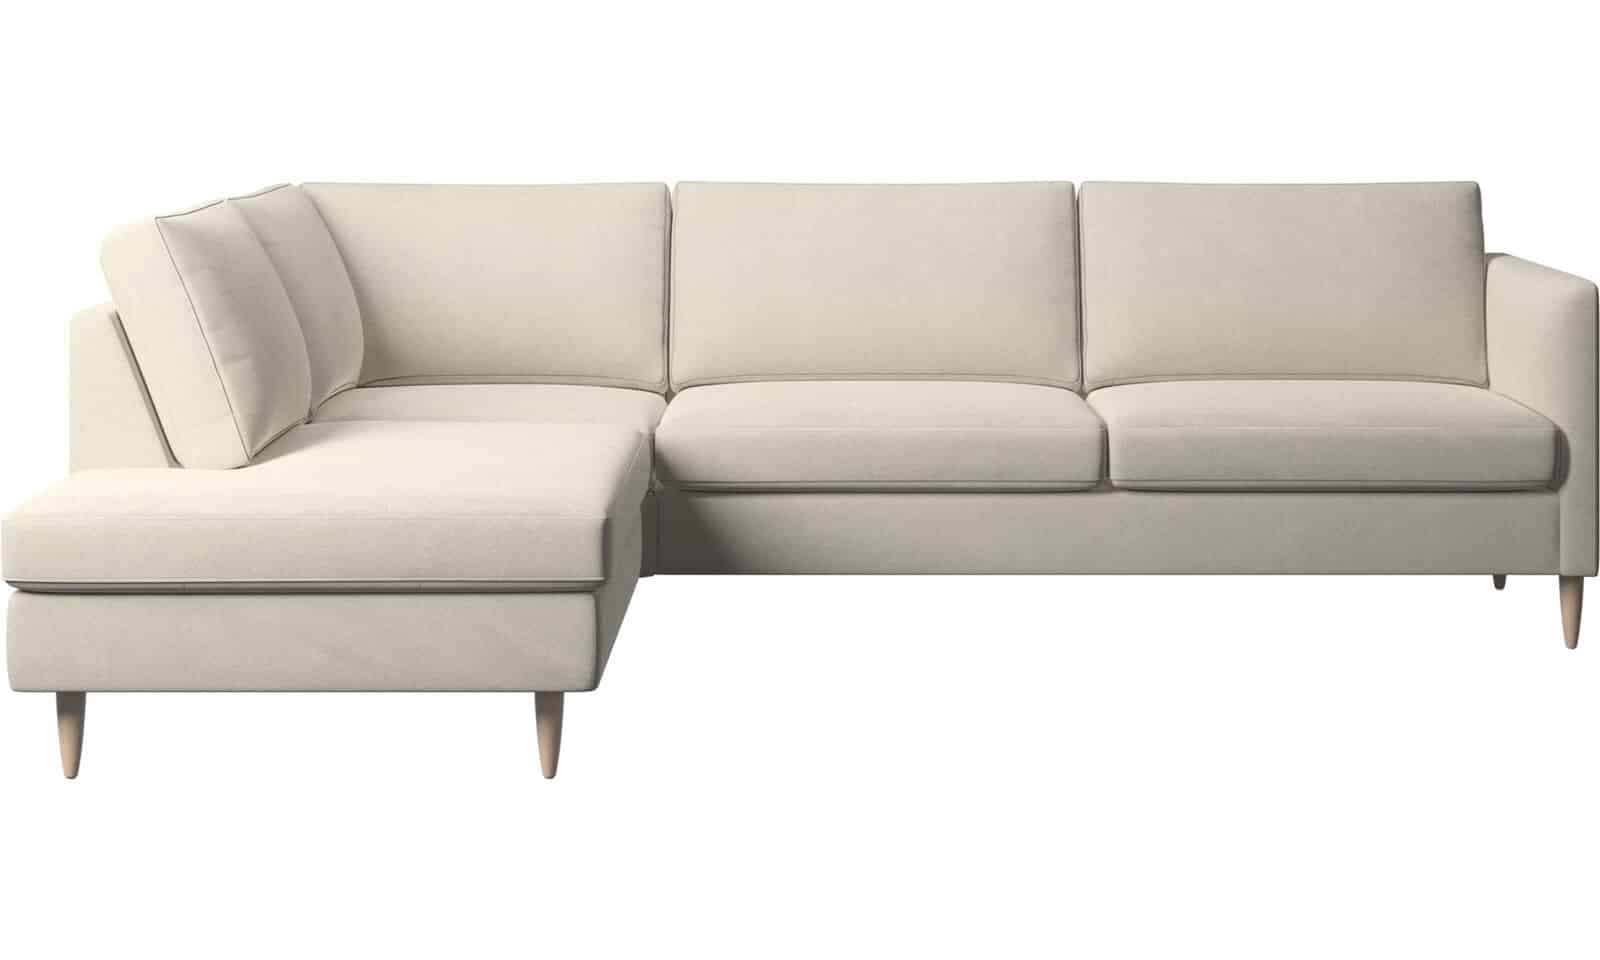 white modern l shaped sofa set design with clean and crisp look and wood legs